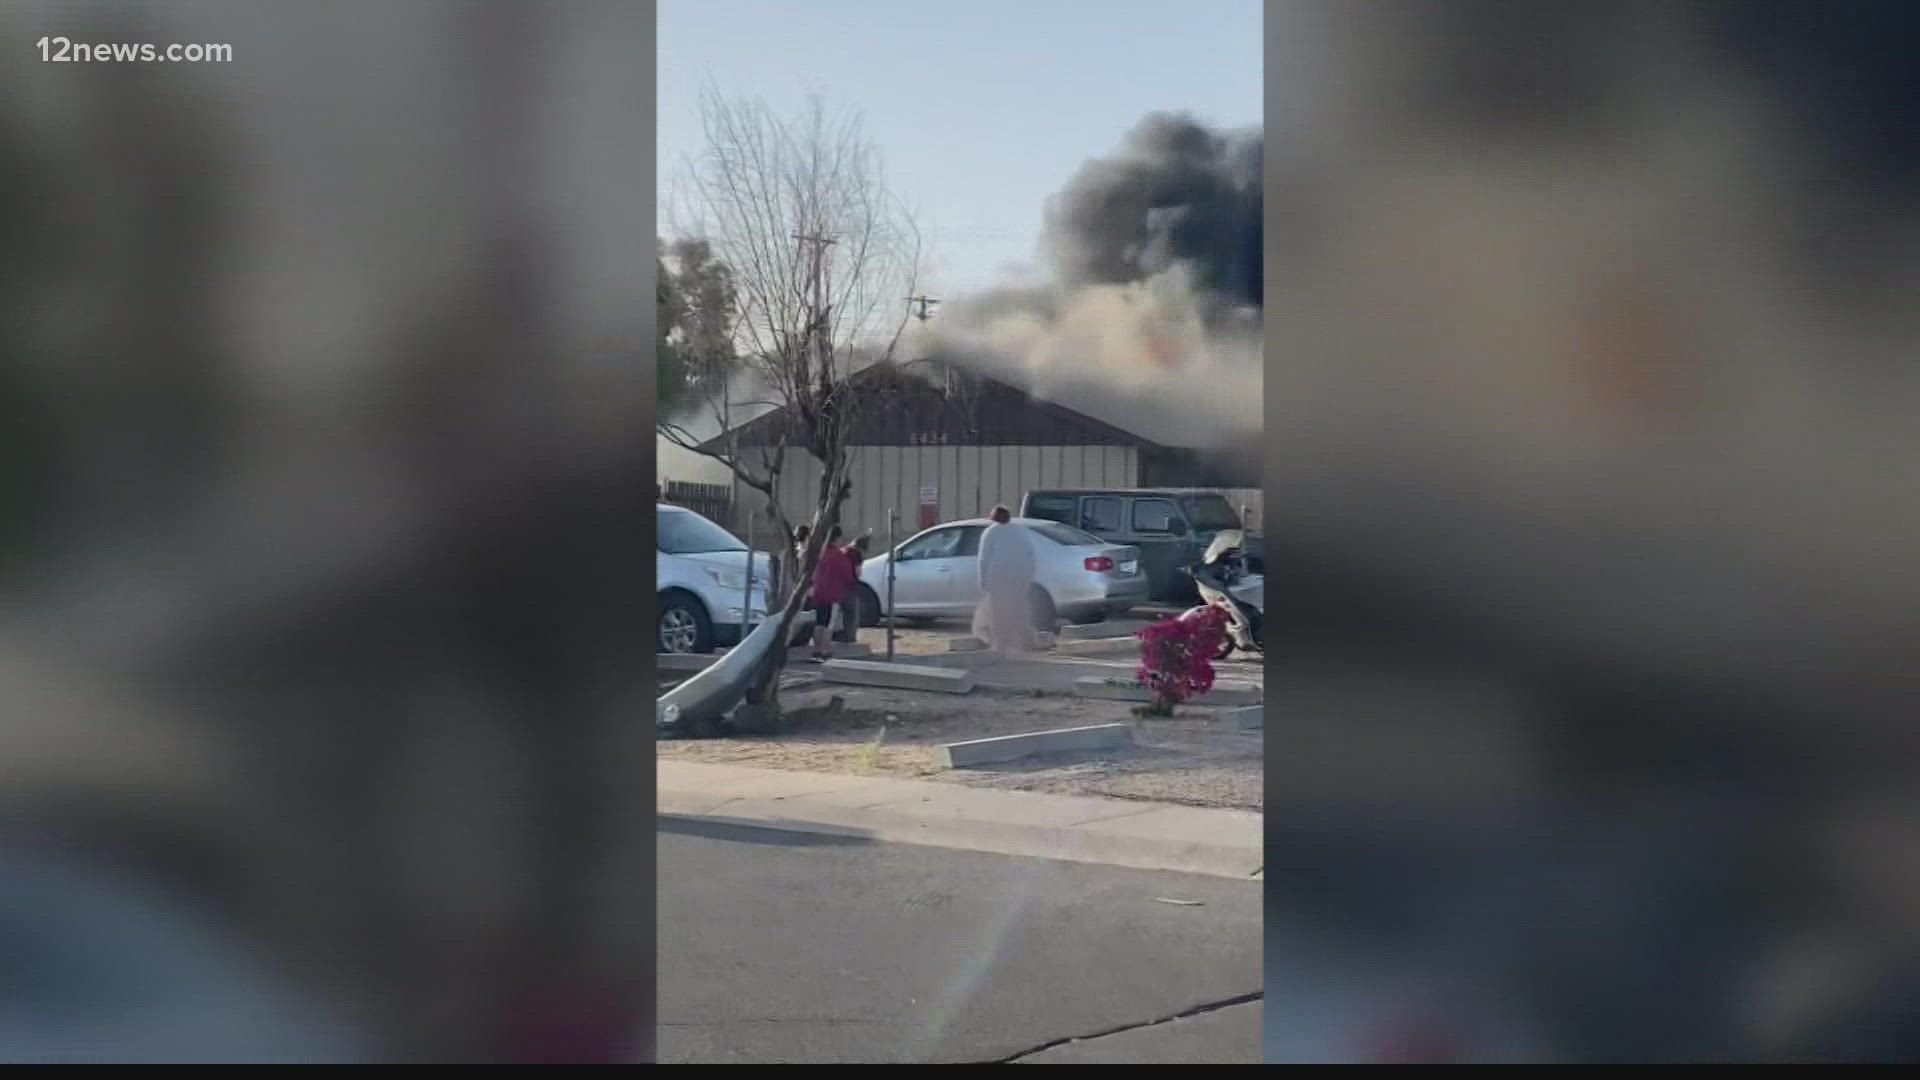 Mesa police said Lt. Bryan Soller was patrolling near 64th and Main streets when he saw a house fully engulfed in flames and jumped into action.